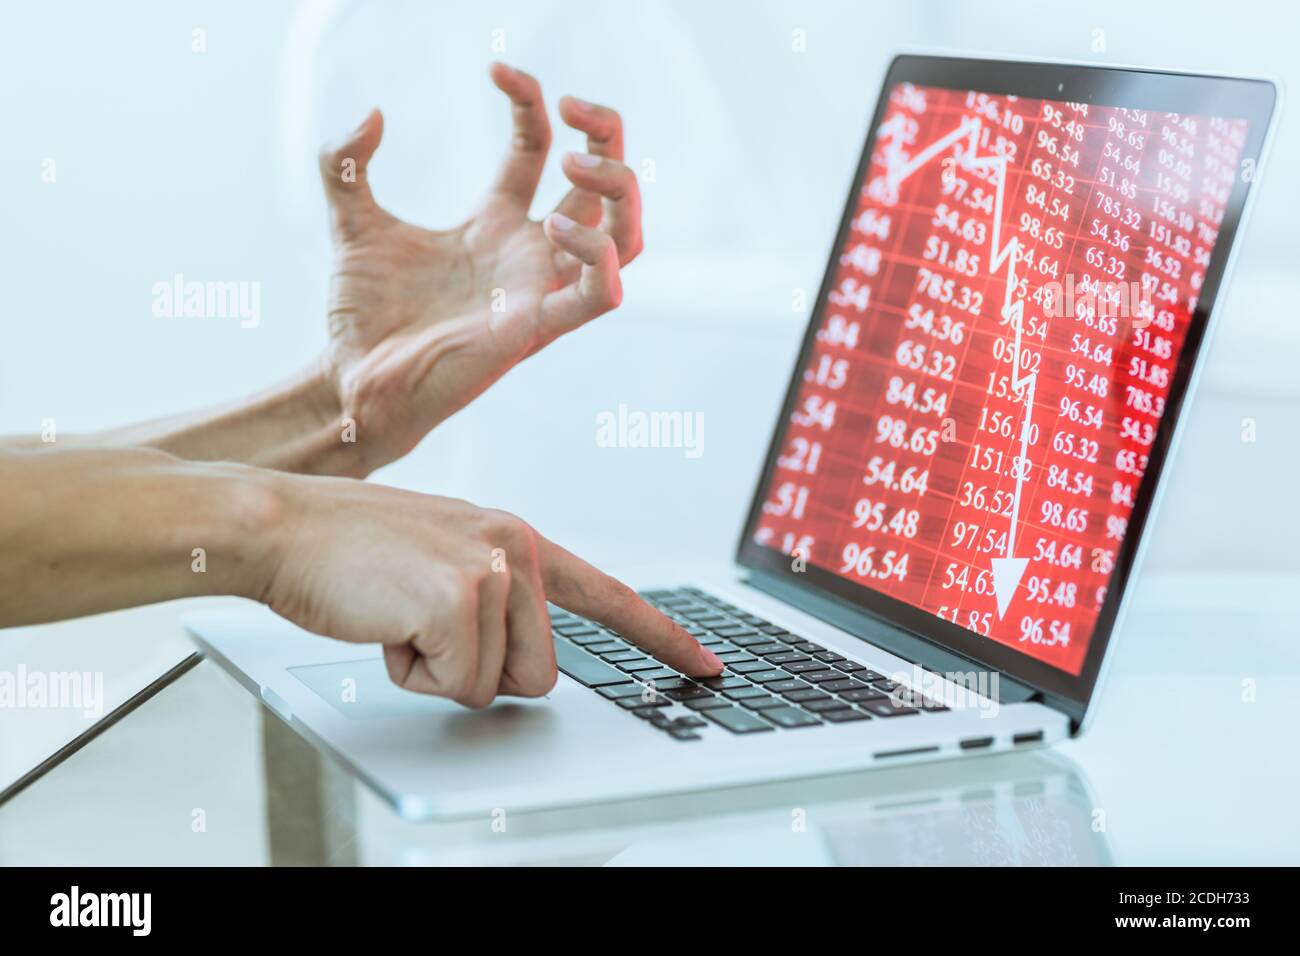 Stressed hand gesture of investor losing money in the stock market crash while typing on a laptop computer. Economy falling red chart. Close-up. Stock Photo